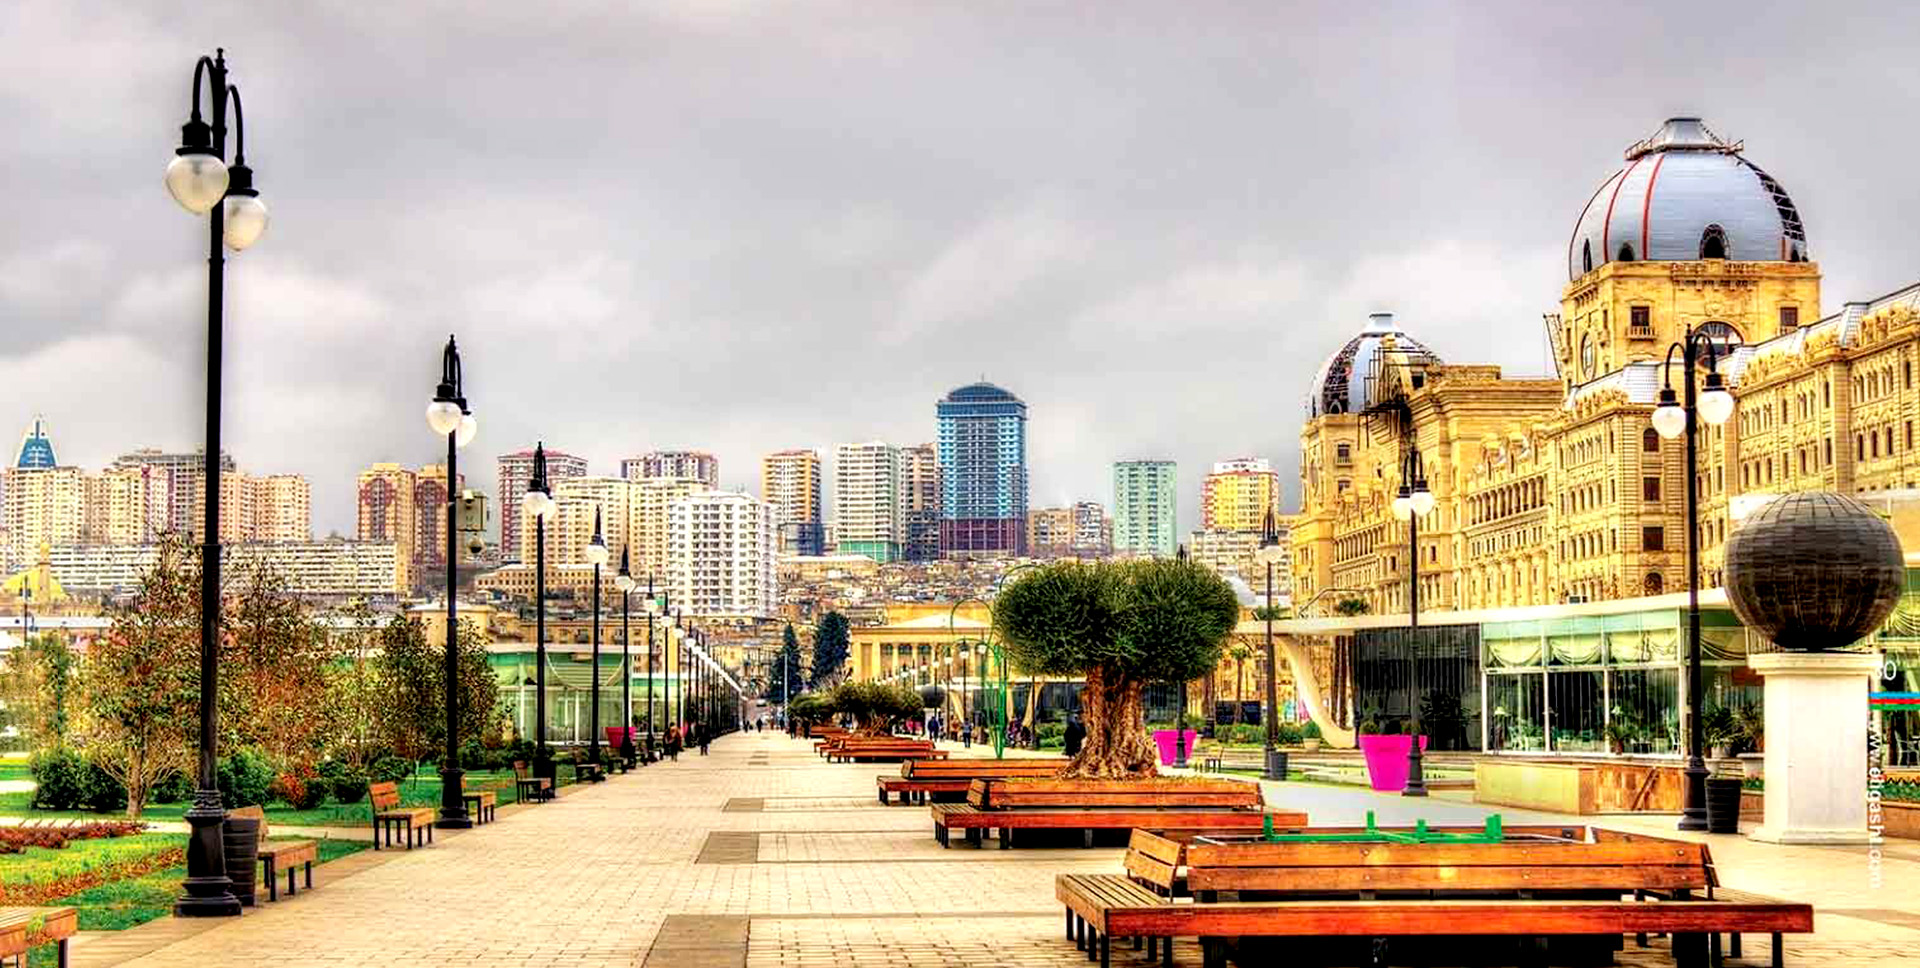 Do you know the sights of Azerbaijan?